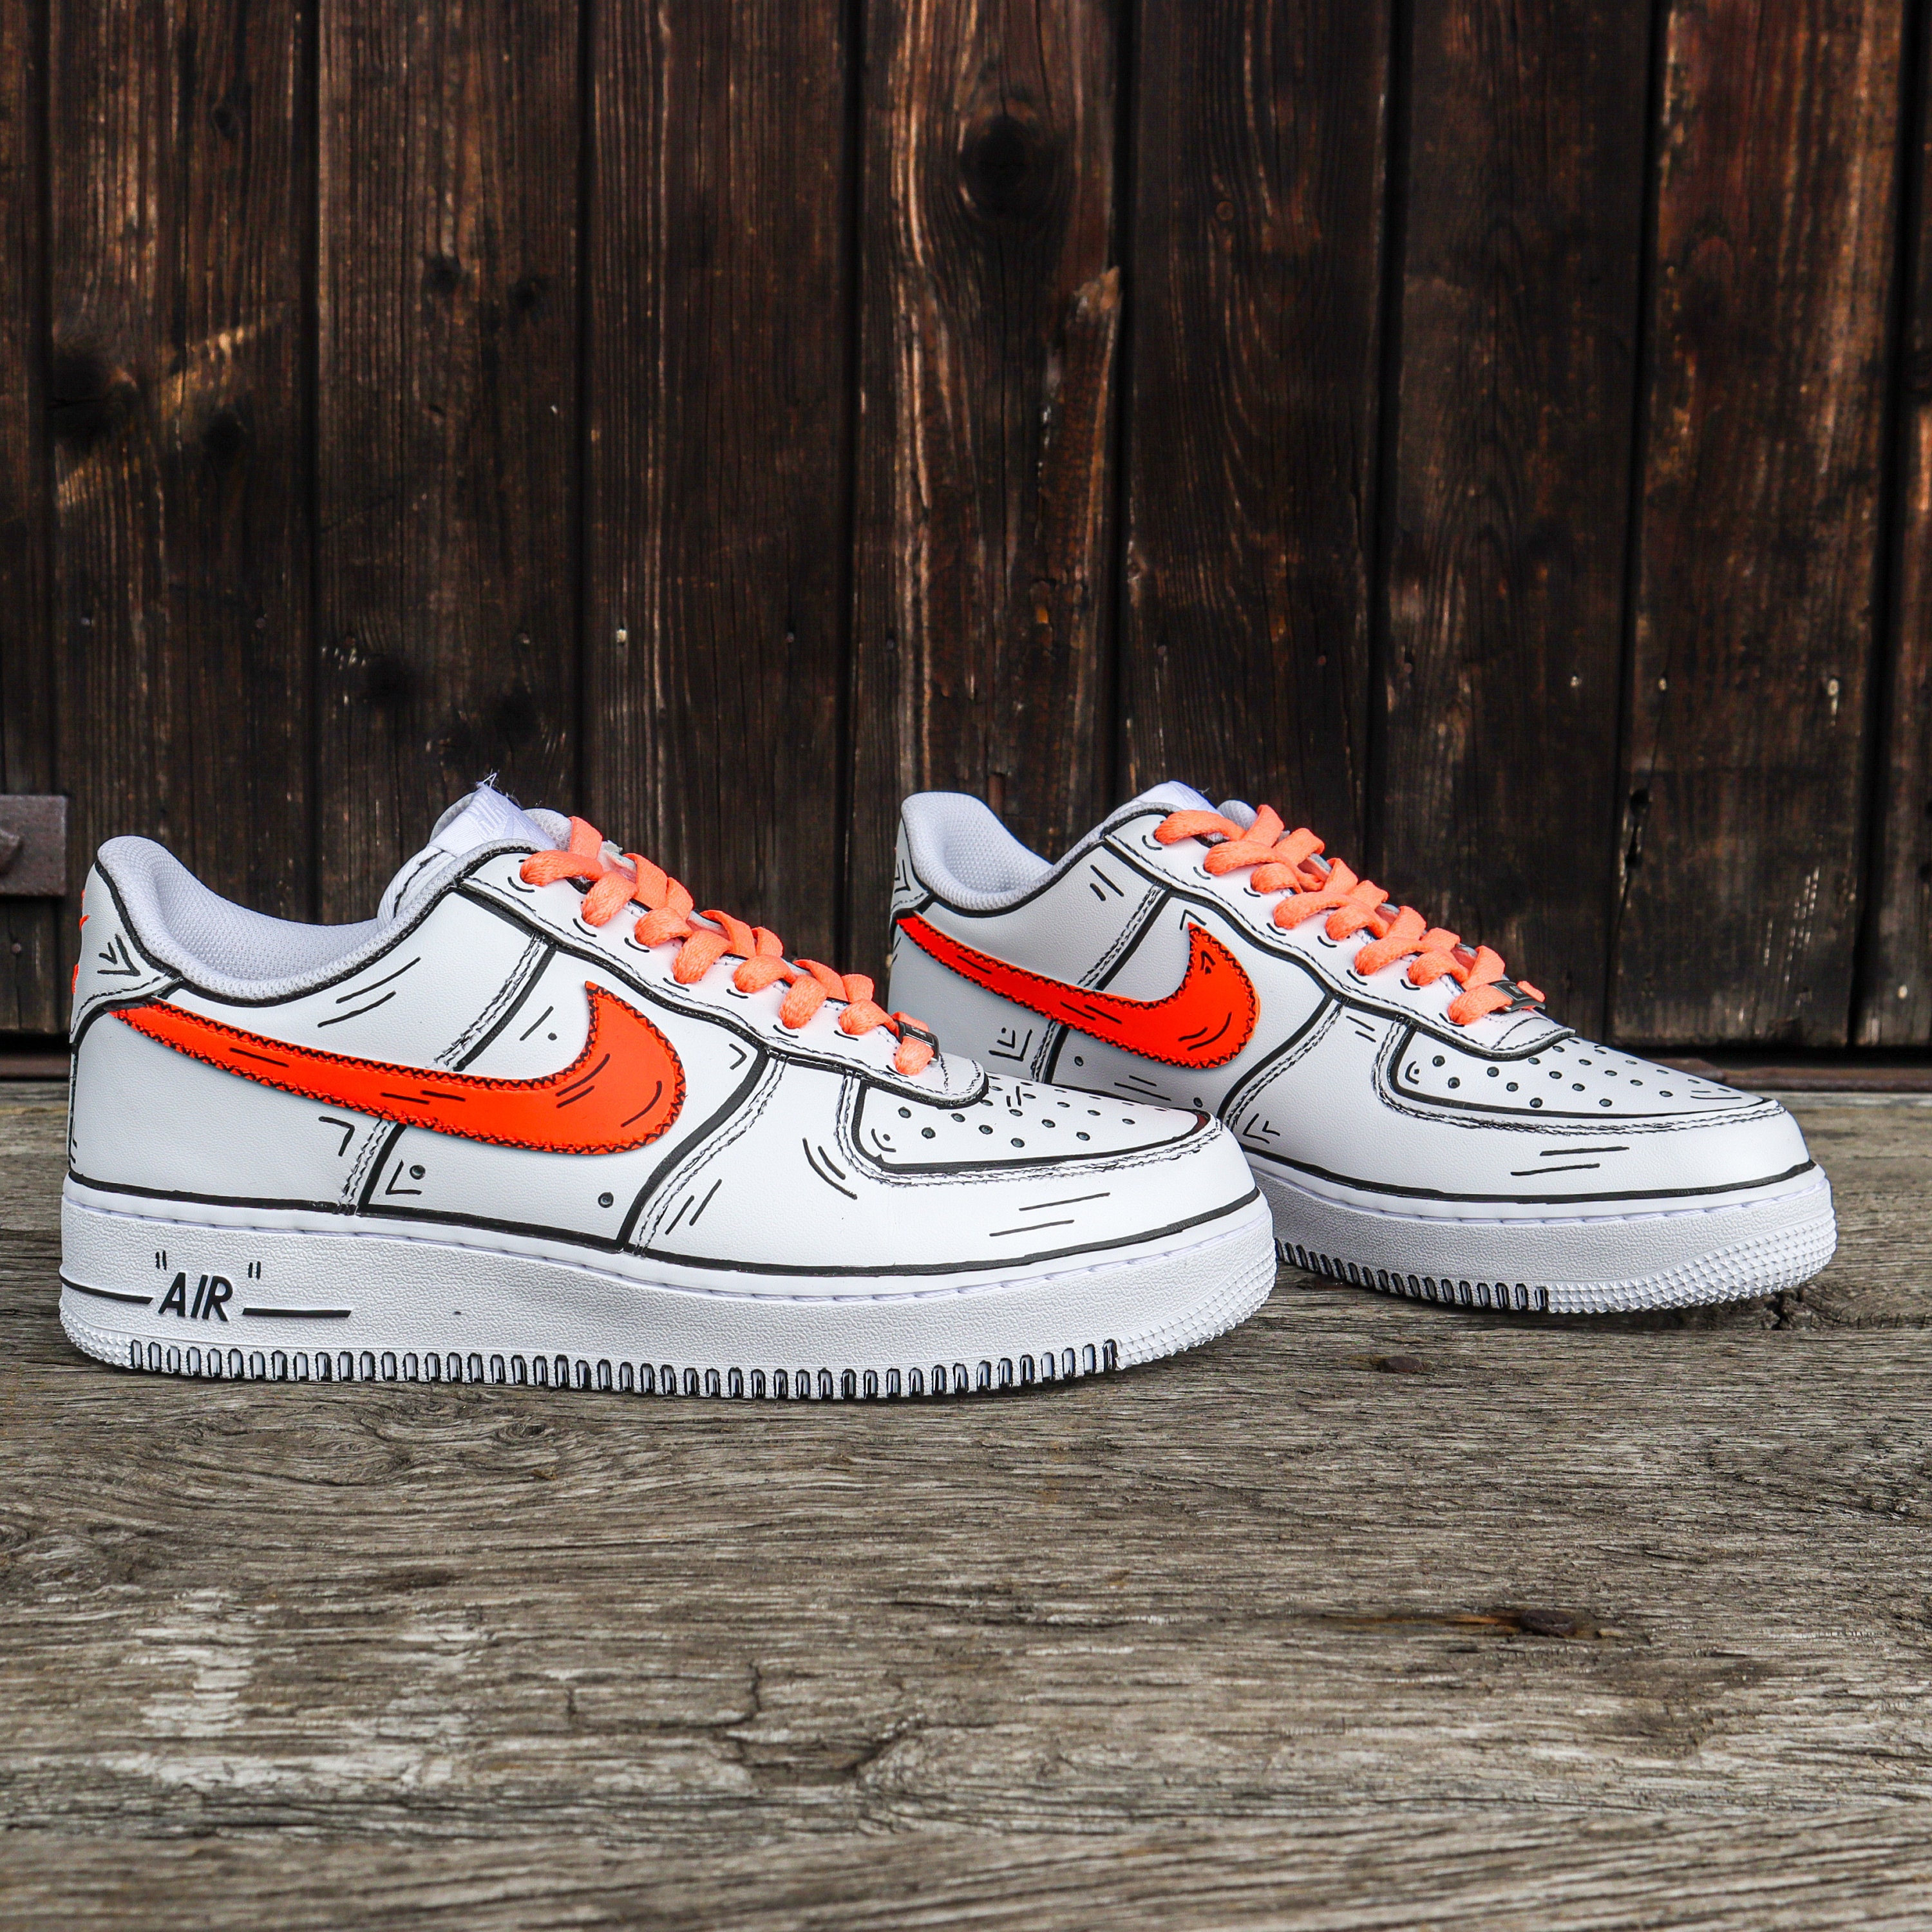 Nike Air Force 1 Custom Shoes Low Cartoon Red Swoosh Black Outline All Sizes White